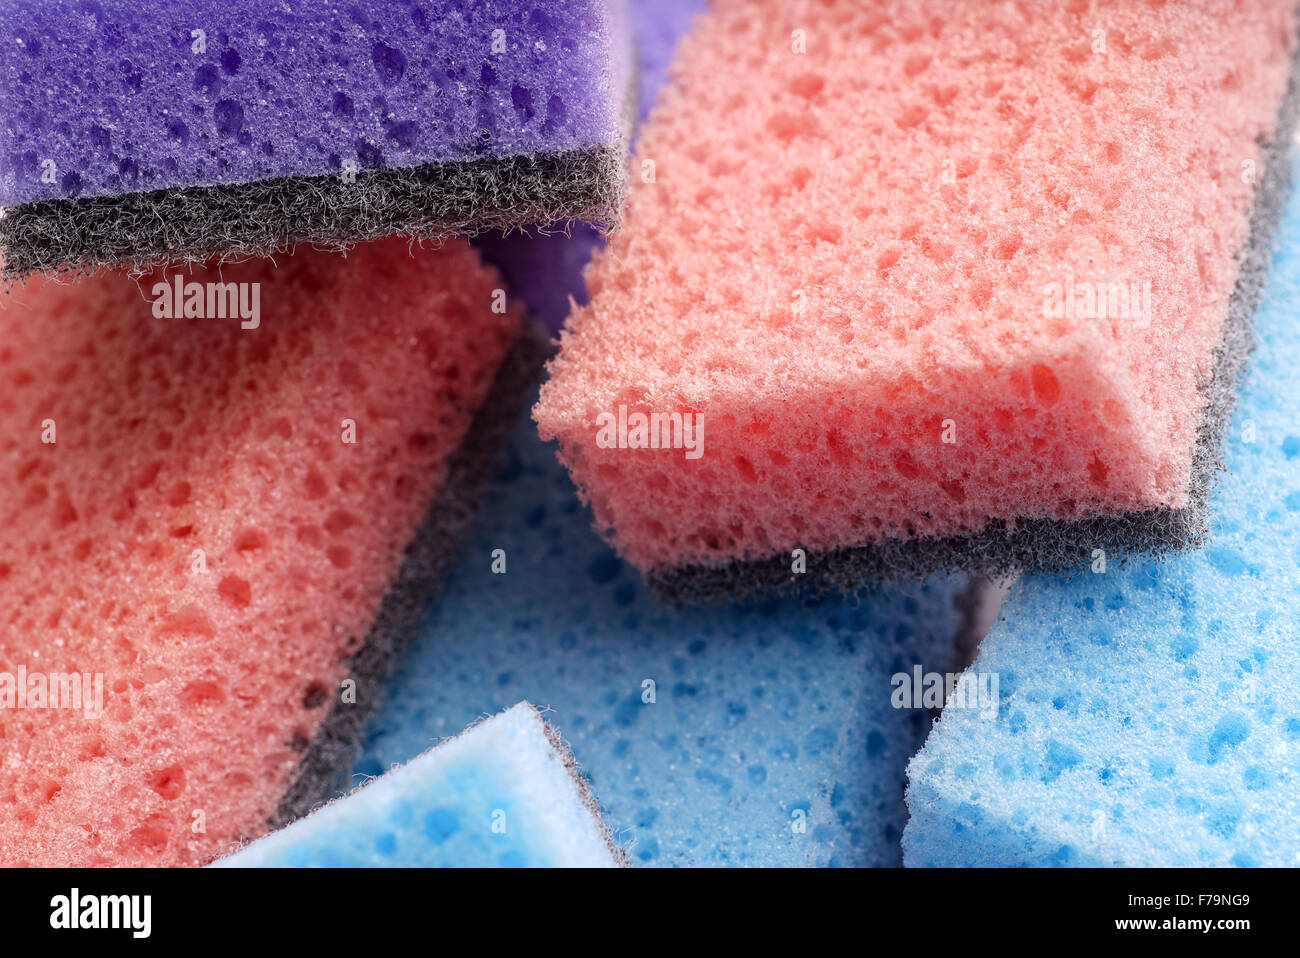 Lots of Cleaning sponges in several colors Stock Photo